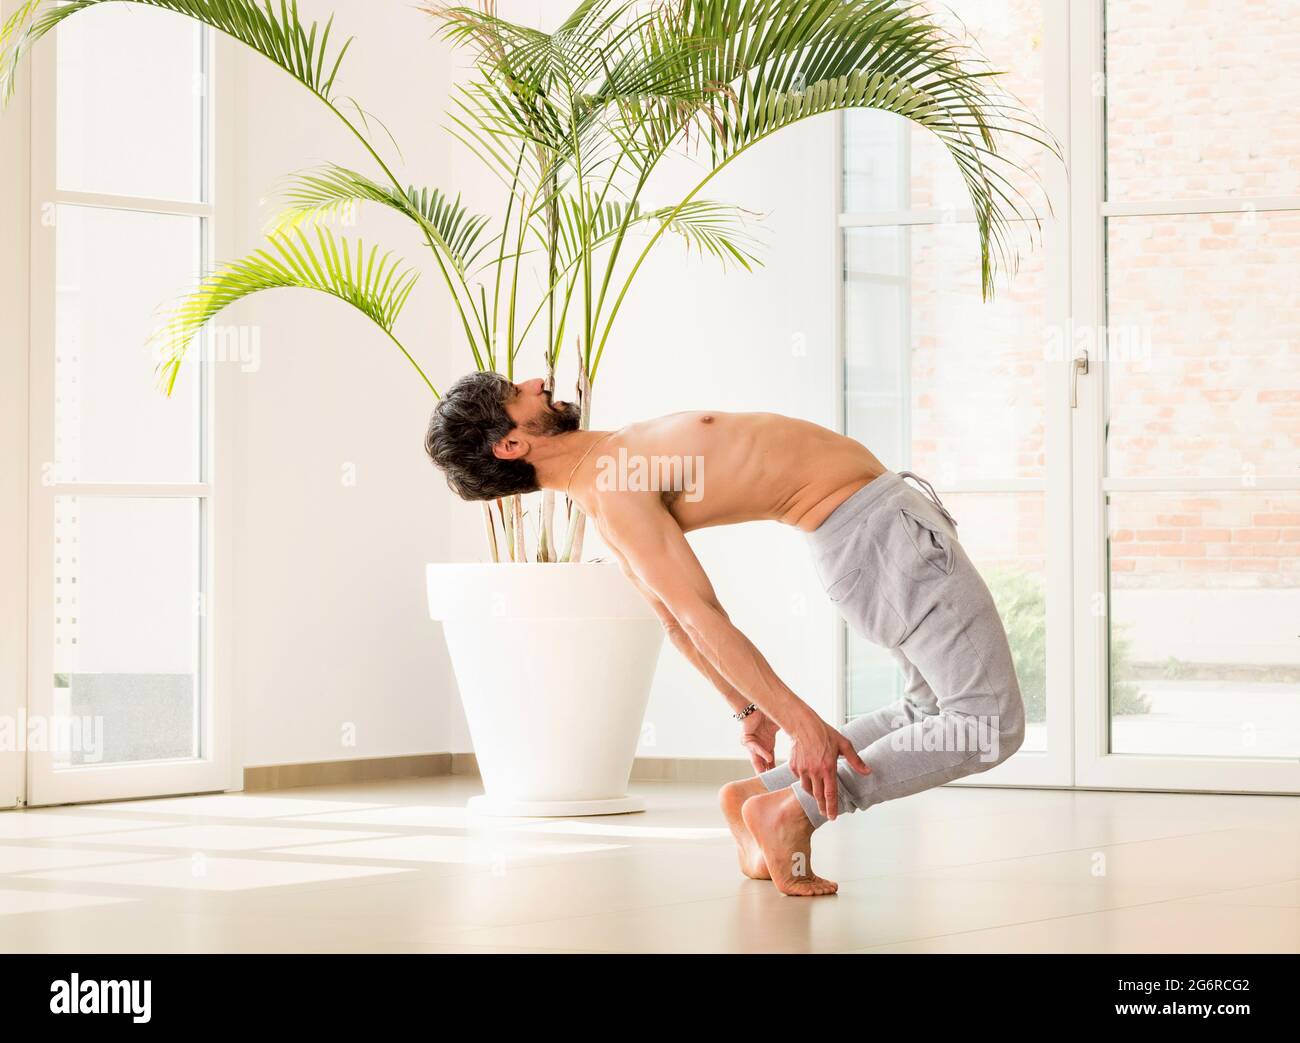 Athletic man doing a calisthenics backbend balance pose to stretch and strengthen his muscles in a high key gym with copyspace in a health and fitness Stock Photo